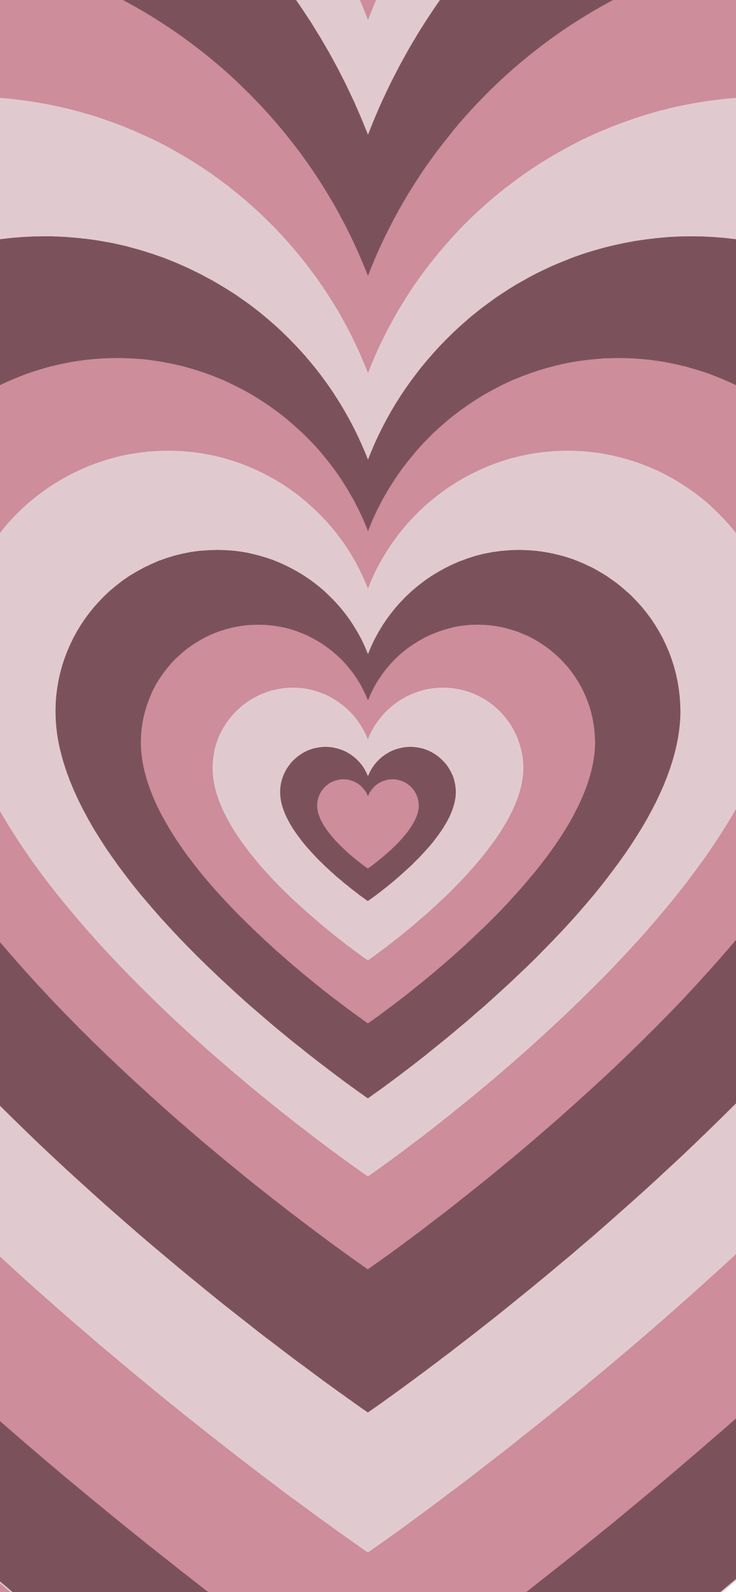 pink hearts <3. iPhone wallpaper pattern, Aesthetic iphone wallpaper, Hea. iPhone wallpaper pattern, Aesthetic iphone wallpaper, Phone wallpaper patterns